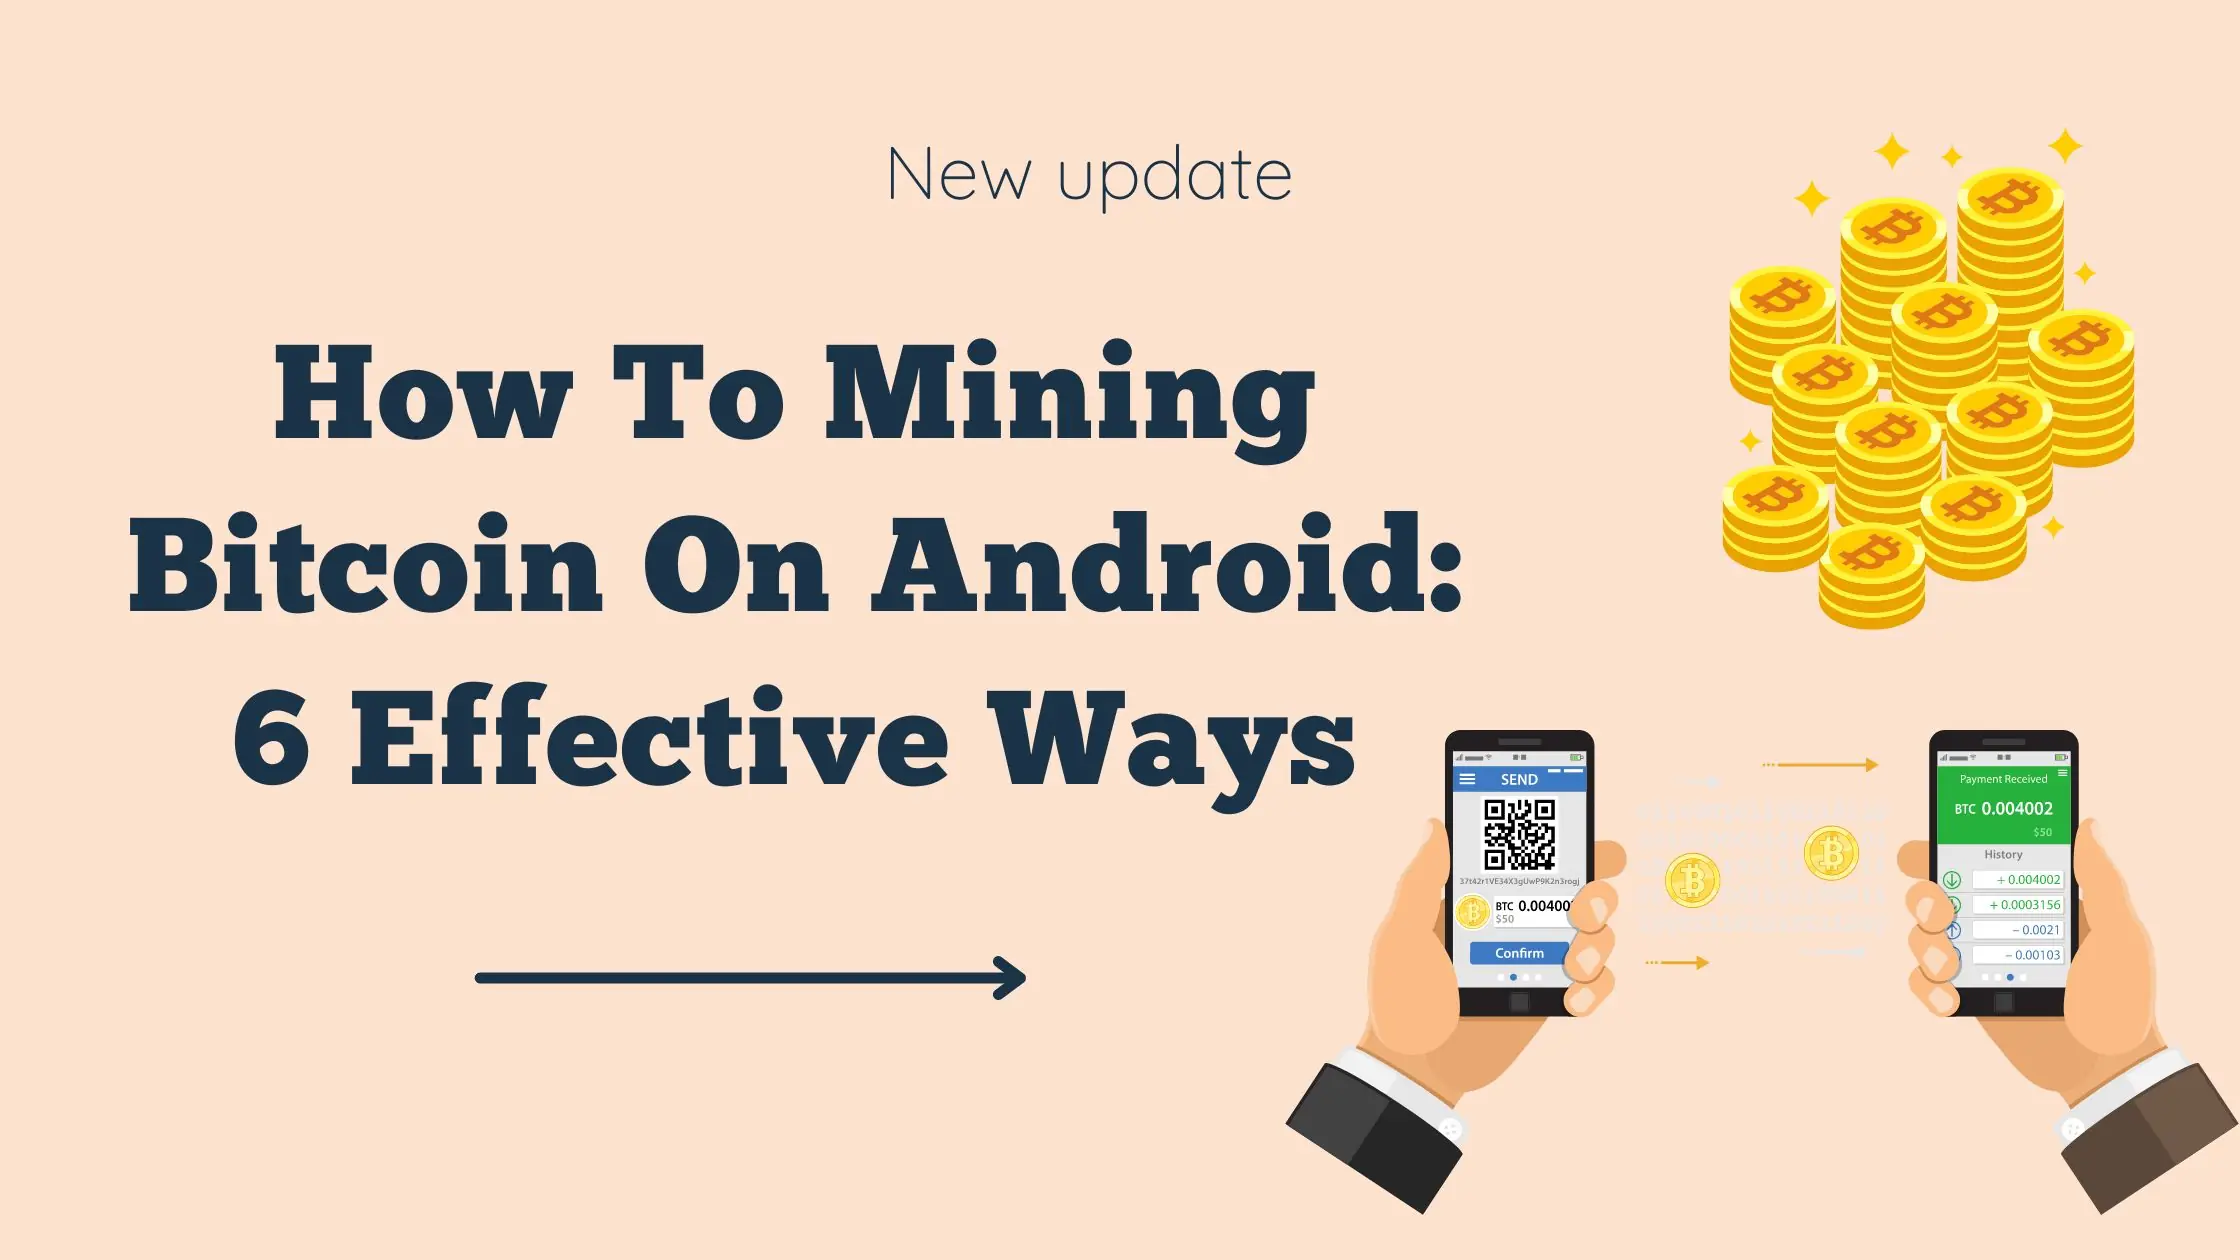 How To Mining Bitcoin On Android: 6 Effective Ways